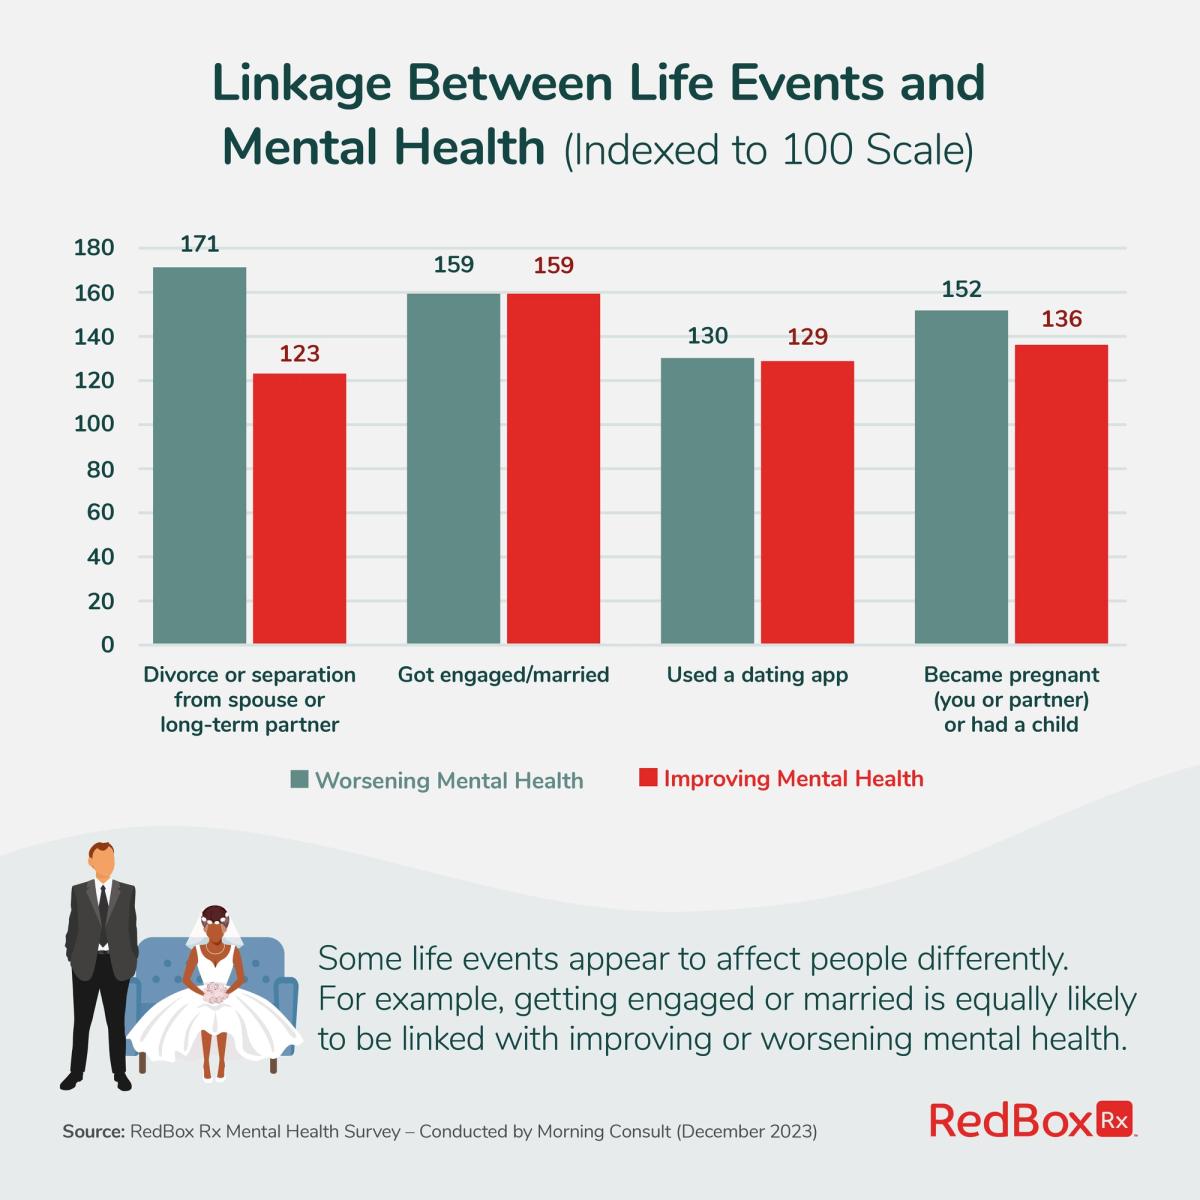 Specific Life Events (Engaged, Married) Equally Likely to be Linked with Improving or Worsening Mental Health